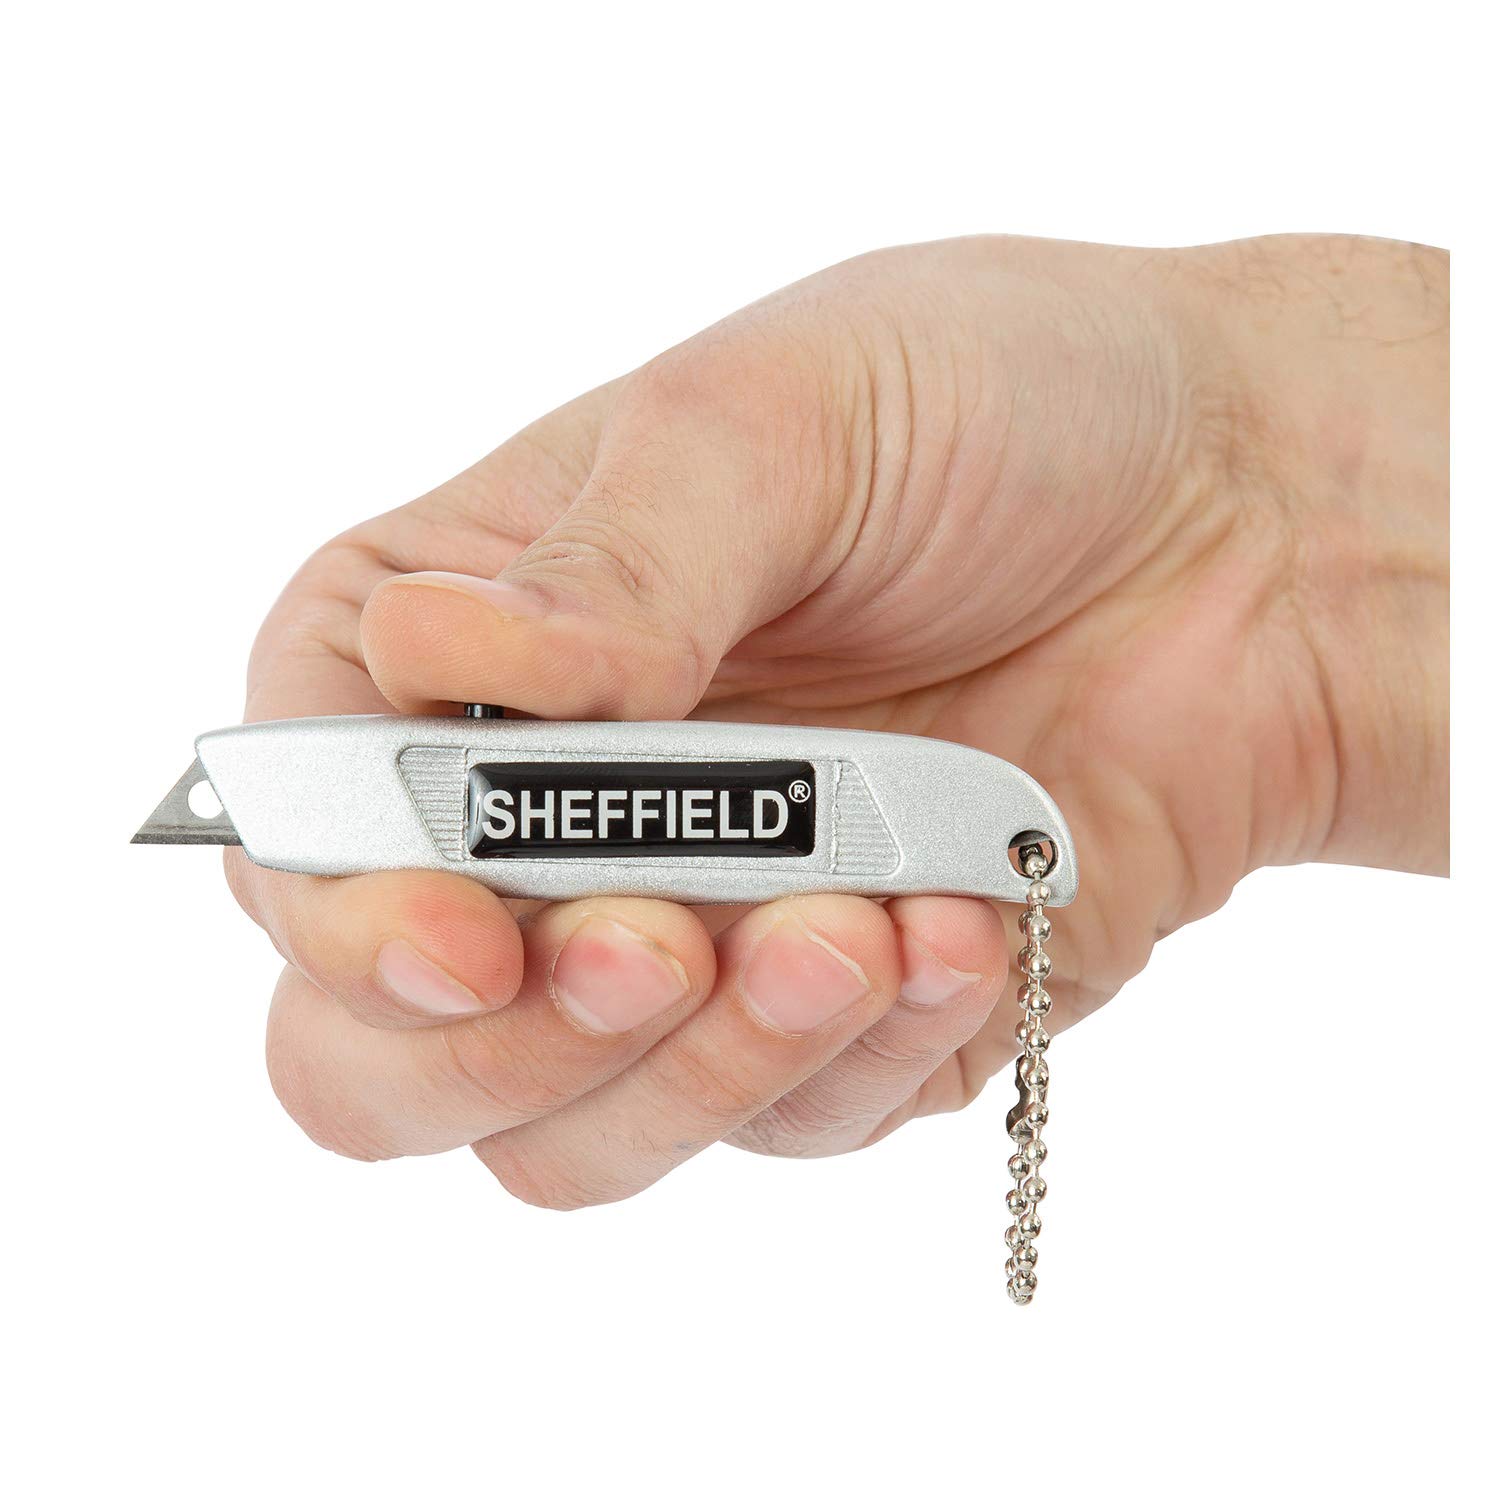 Sheffield Mini Retractable Utility Knife (12245) $3.98 + Free Shipping w/ Prime or on $35+